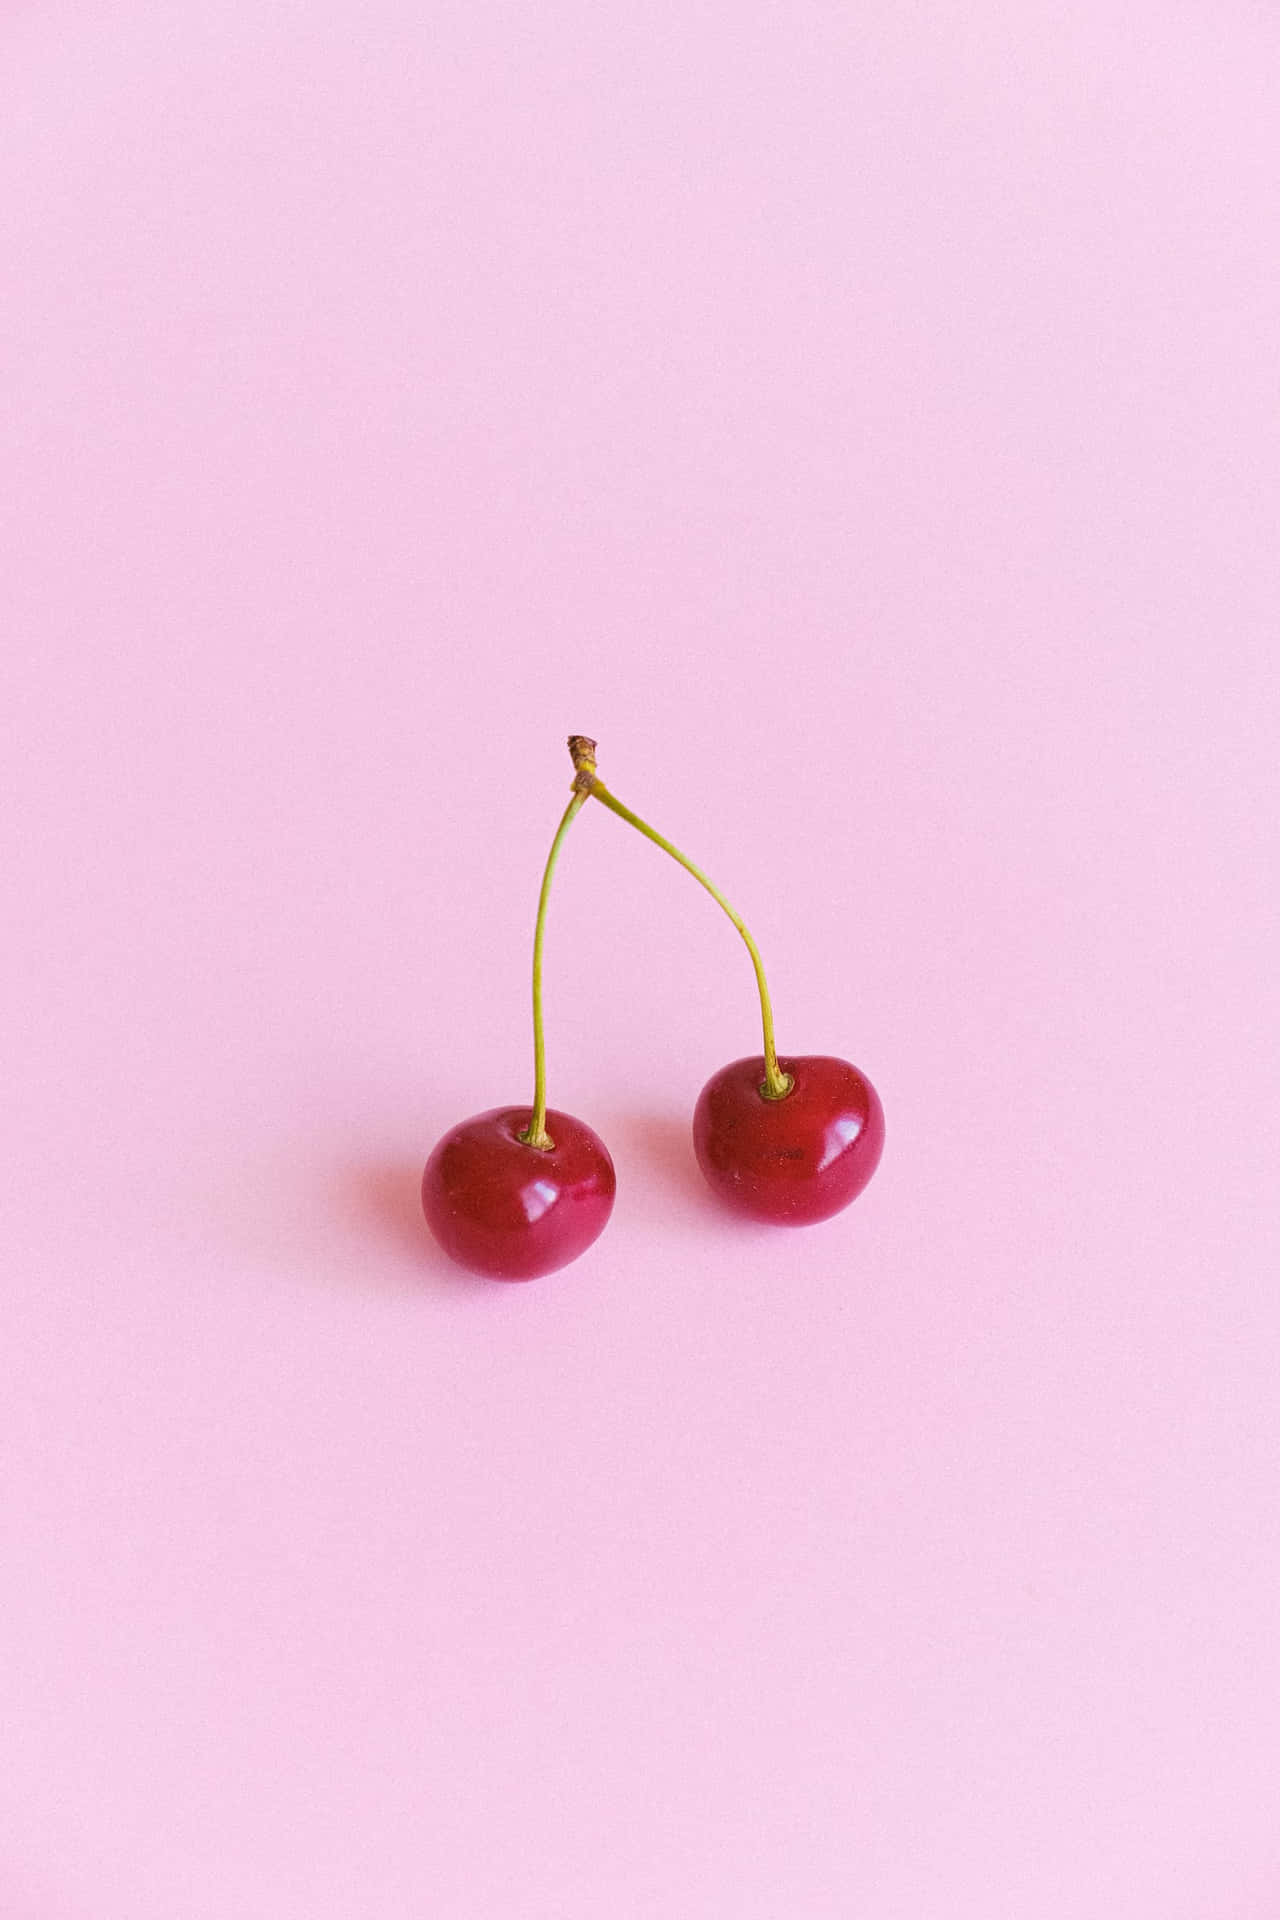 Pale Pink Background Red Cherries